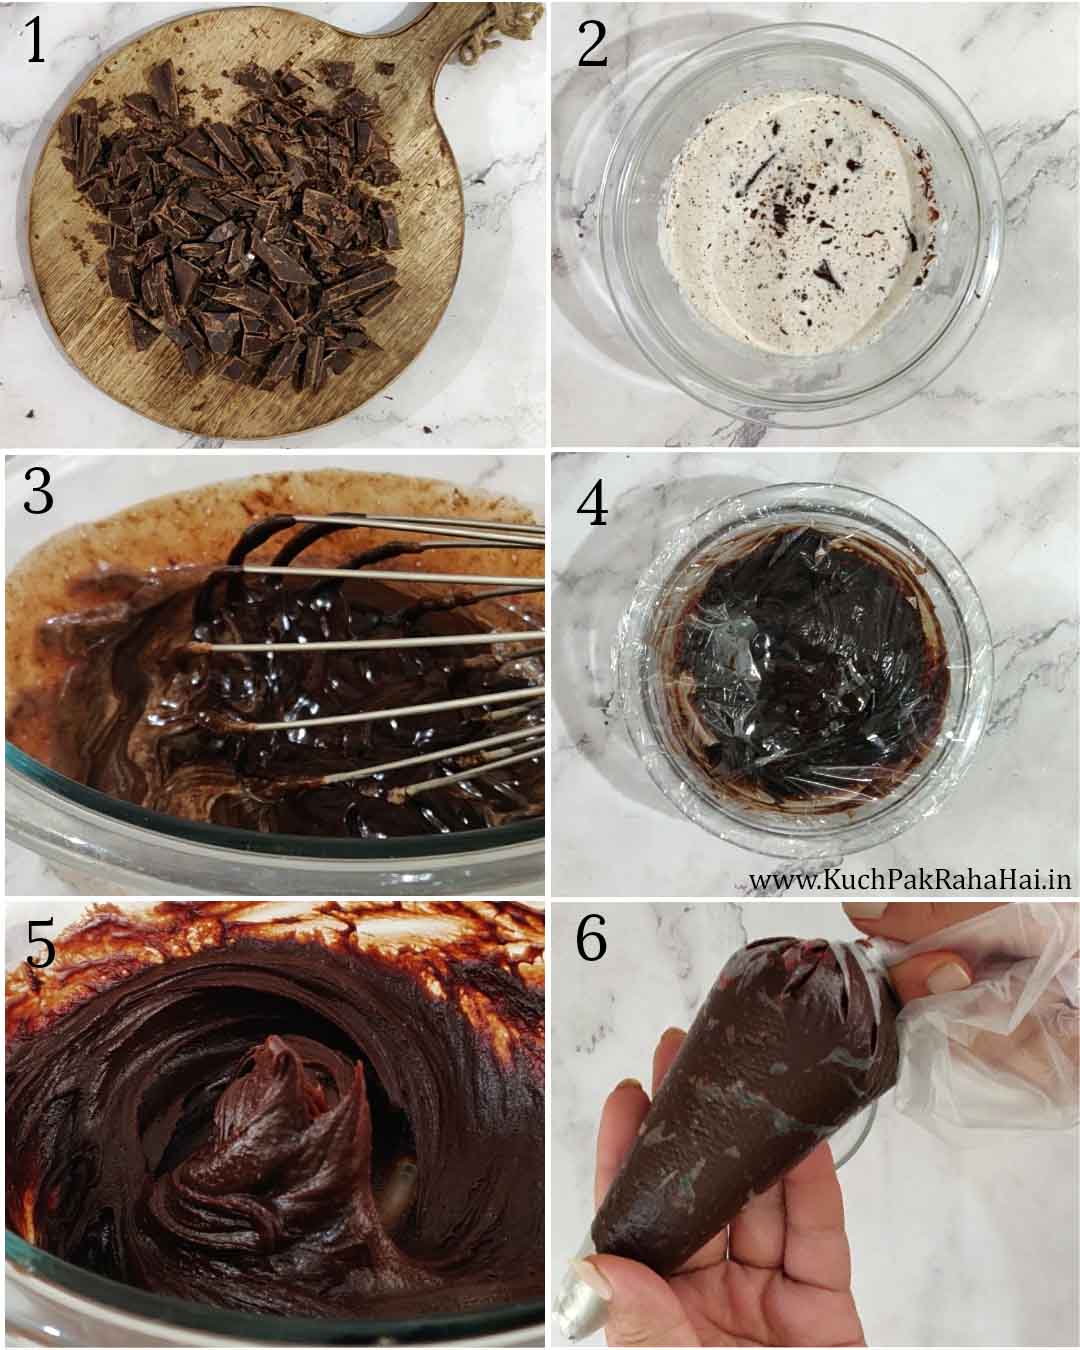 How to make chocolate ganache for icing